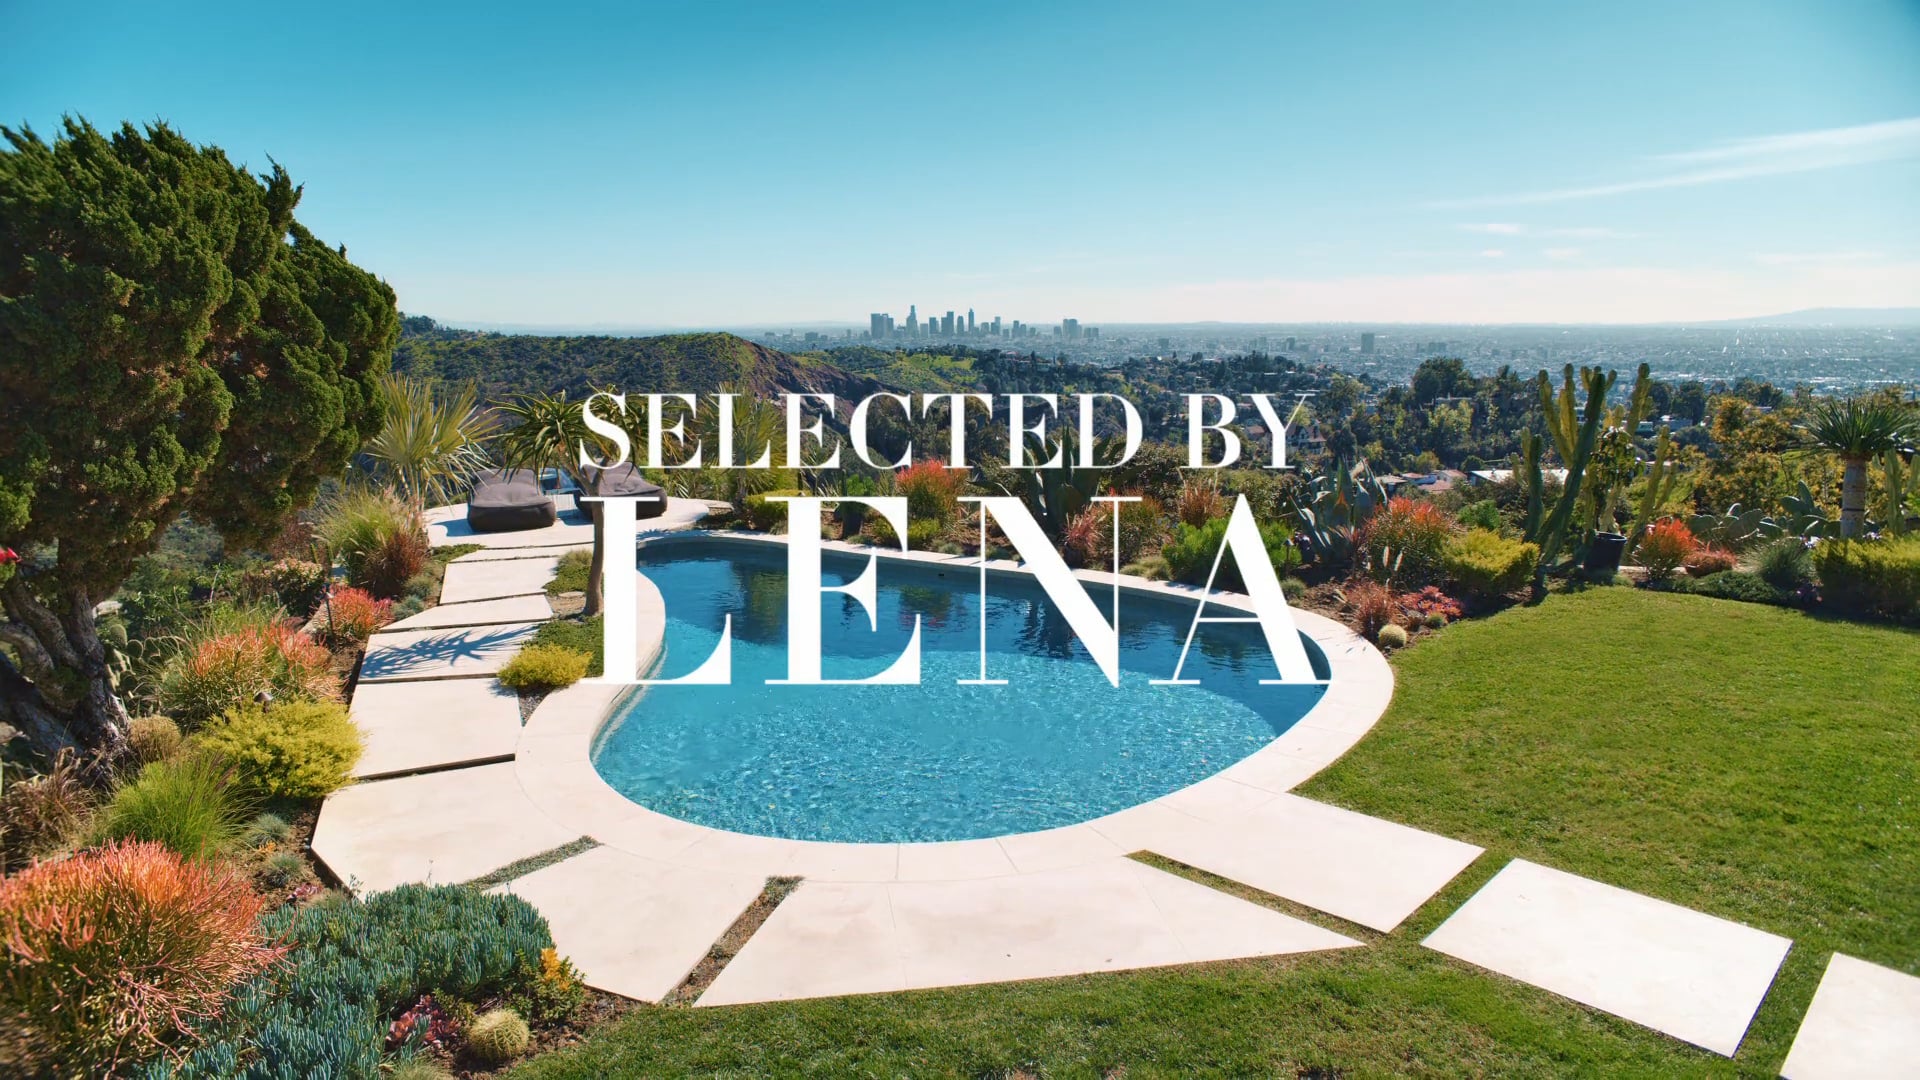 Selected by Lena